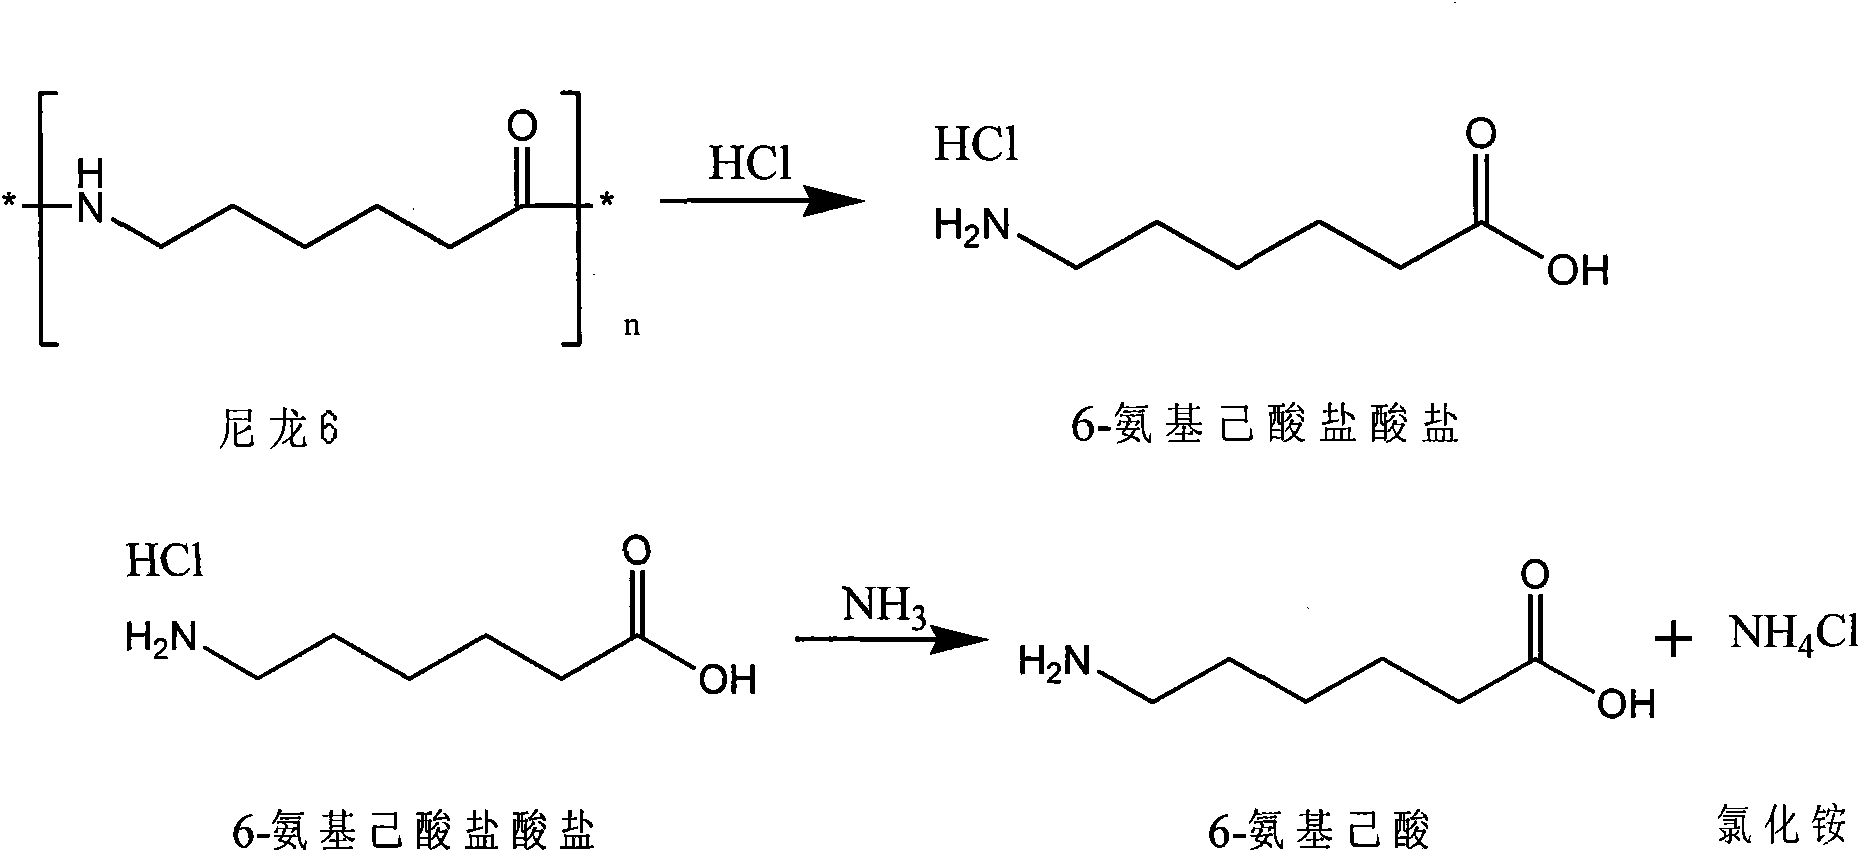 Method for producing 6-aminocaproic acid hydrochloride and 6-aminocaproic acid by using nylon-6 waste through depolymerization